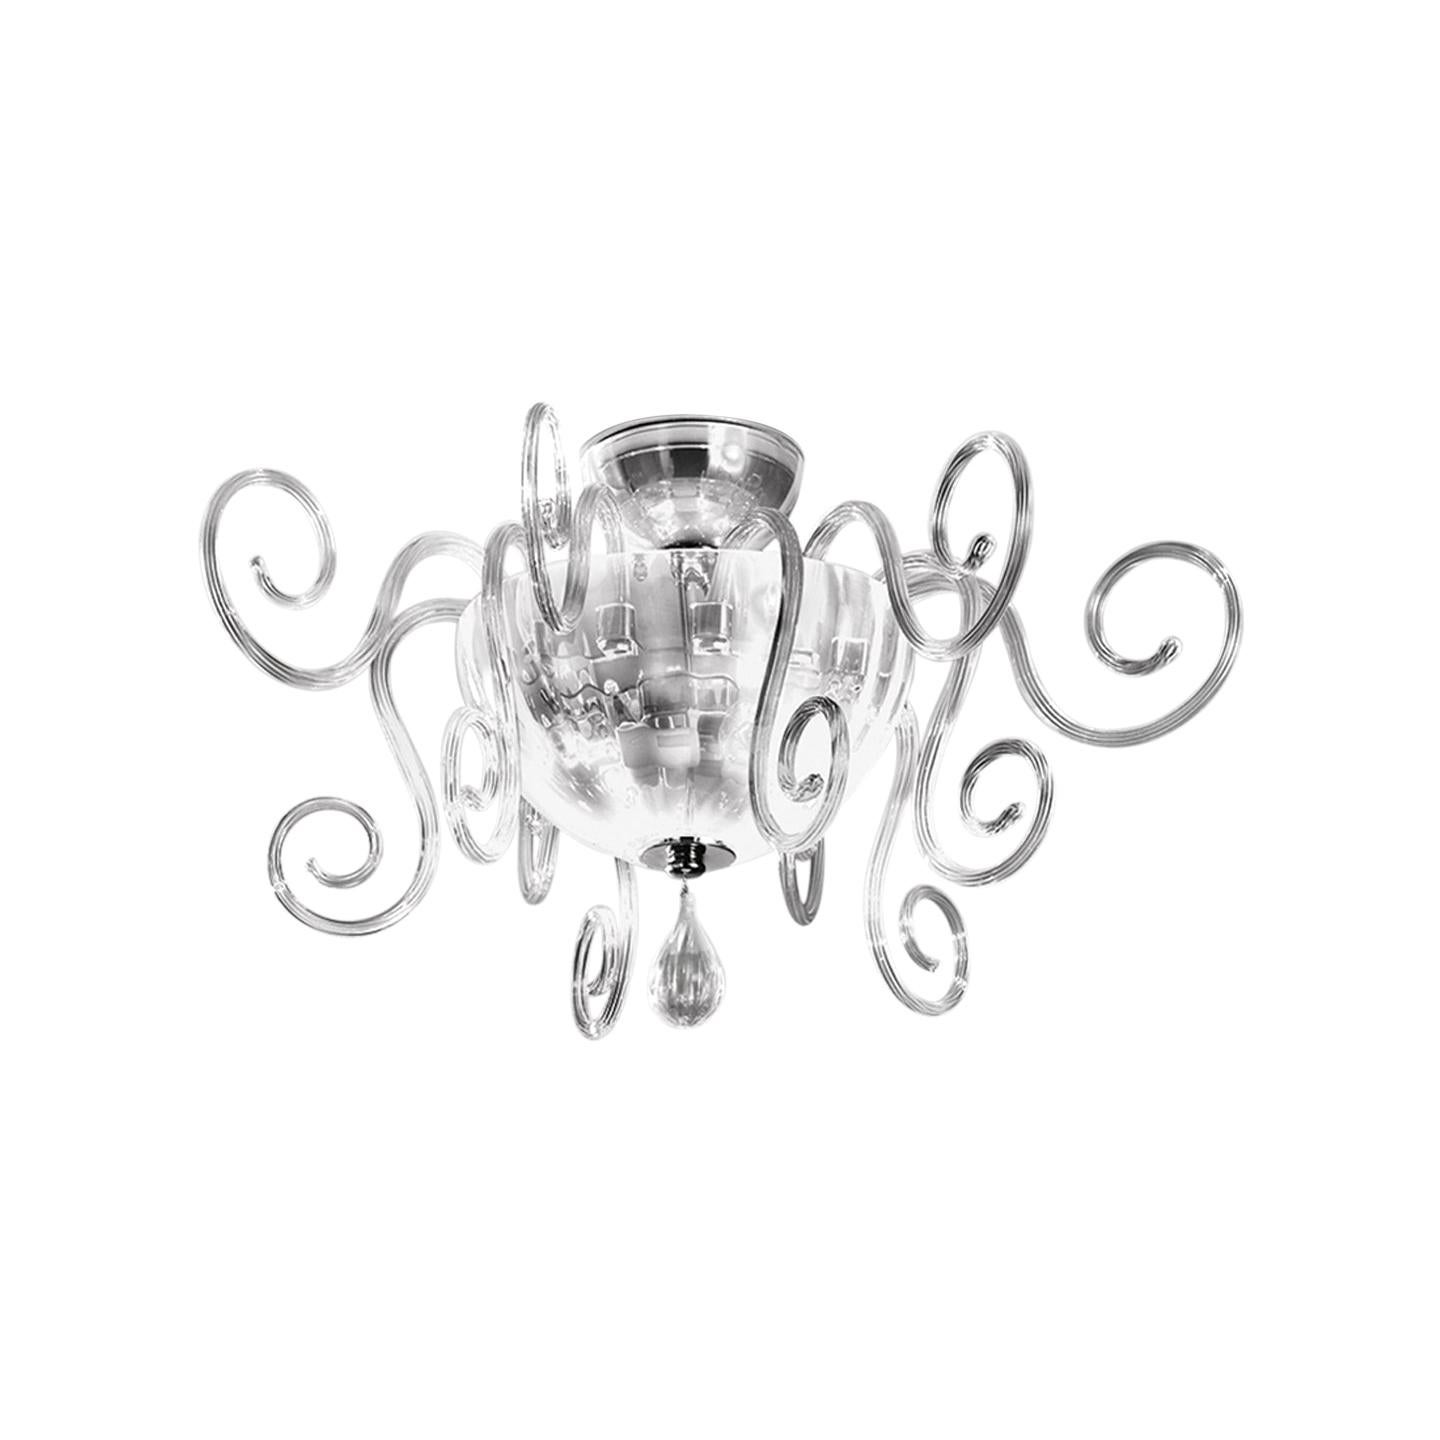 Leucos Bolero PL Ceiling Light in Crystal and Chrome by Carlo Nason In New Condition For Sale In Edison, NJ